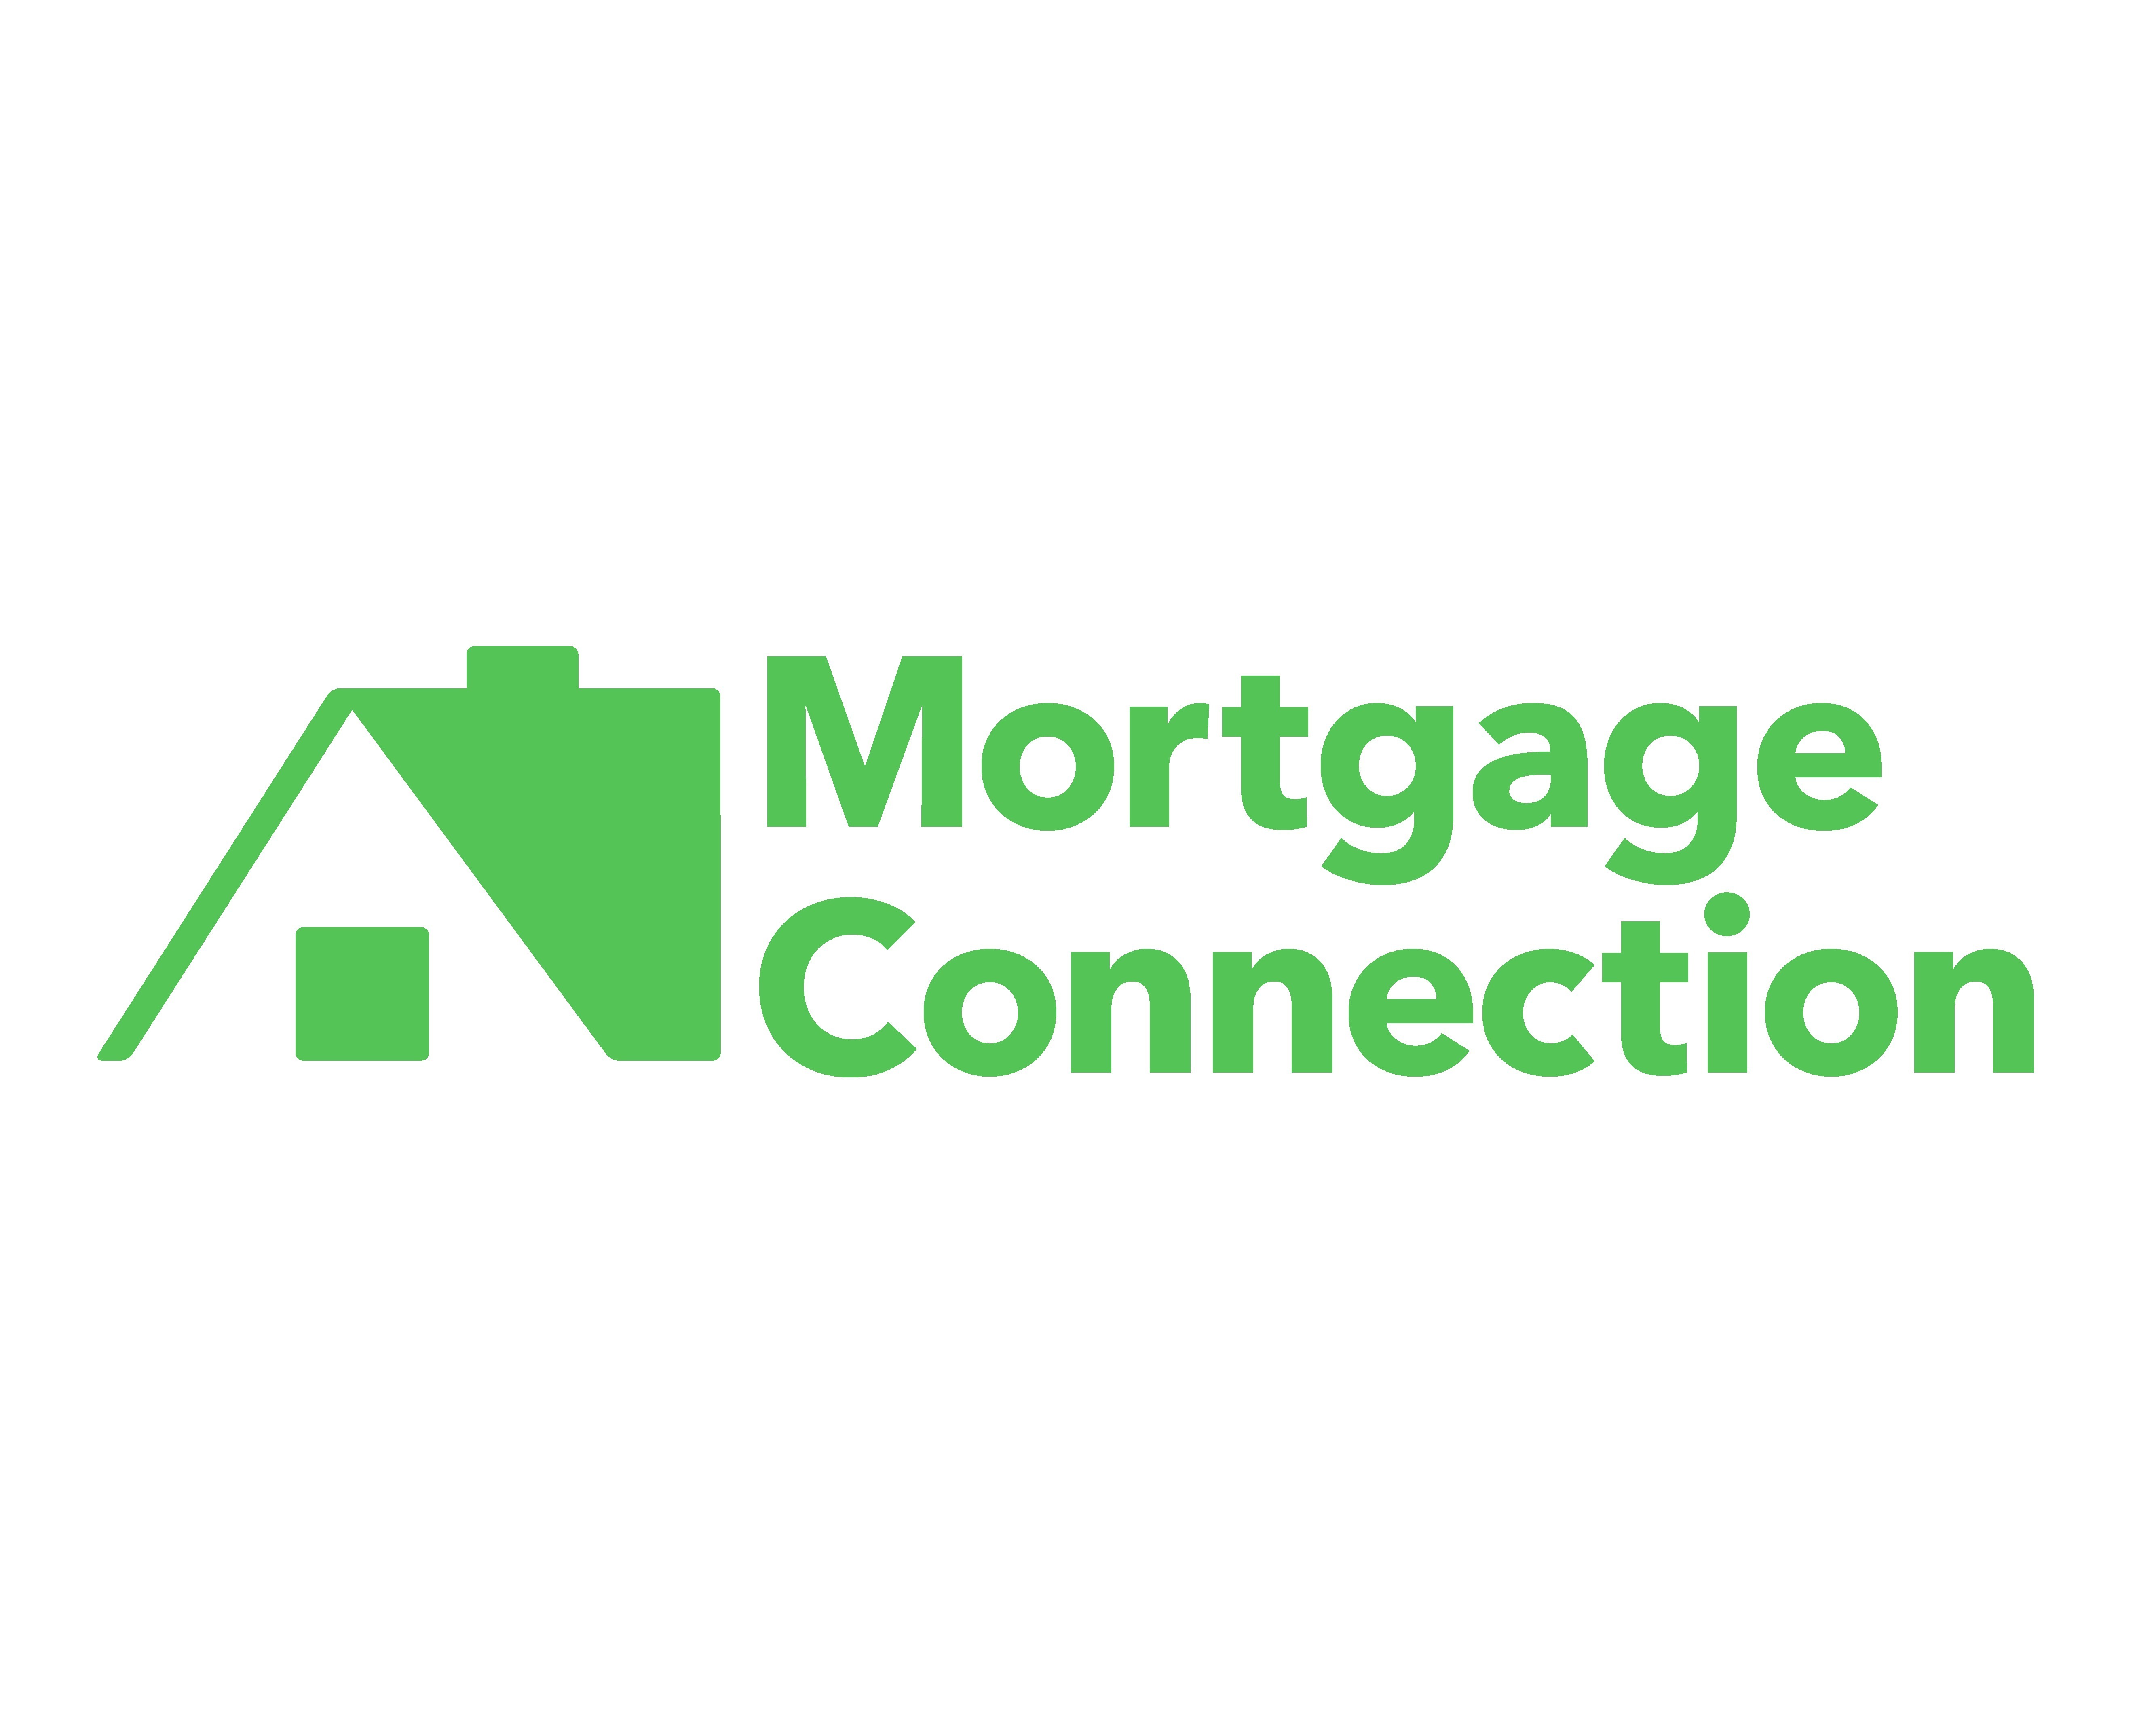 Mortgage Connection